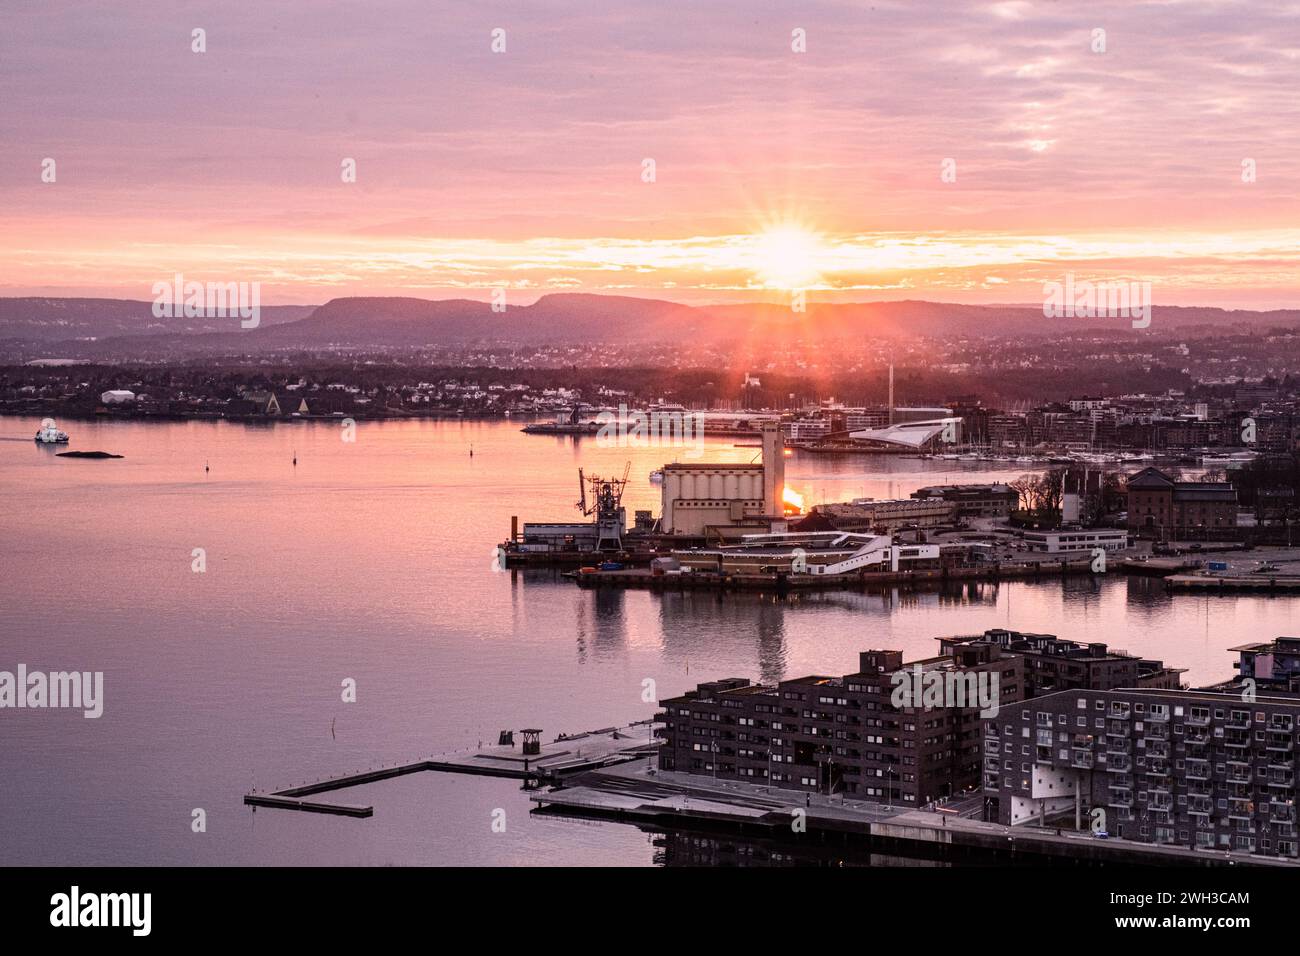 The harbour area of the city of Oslo in Norway at sunset from Ekeberg park viewpoint. Stock Photo